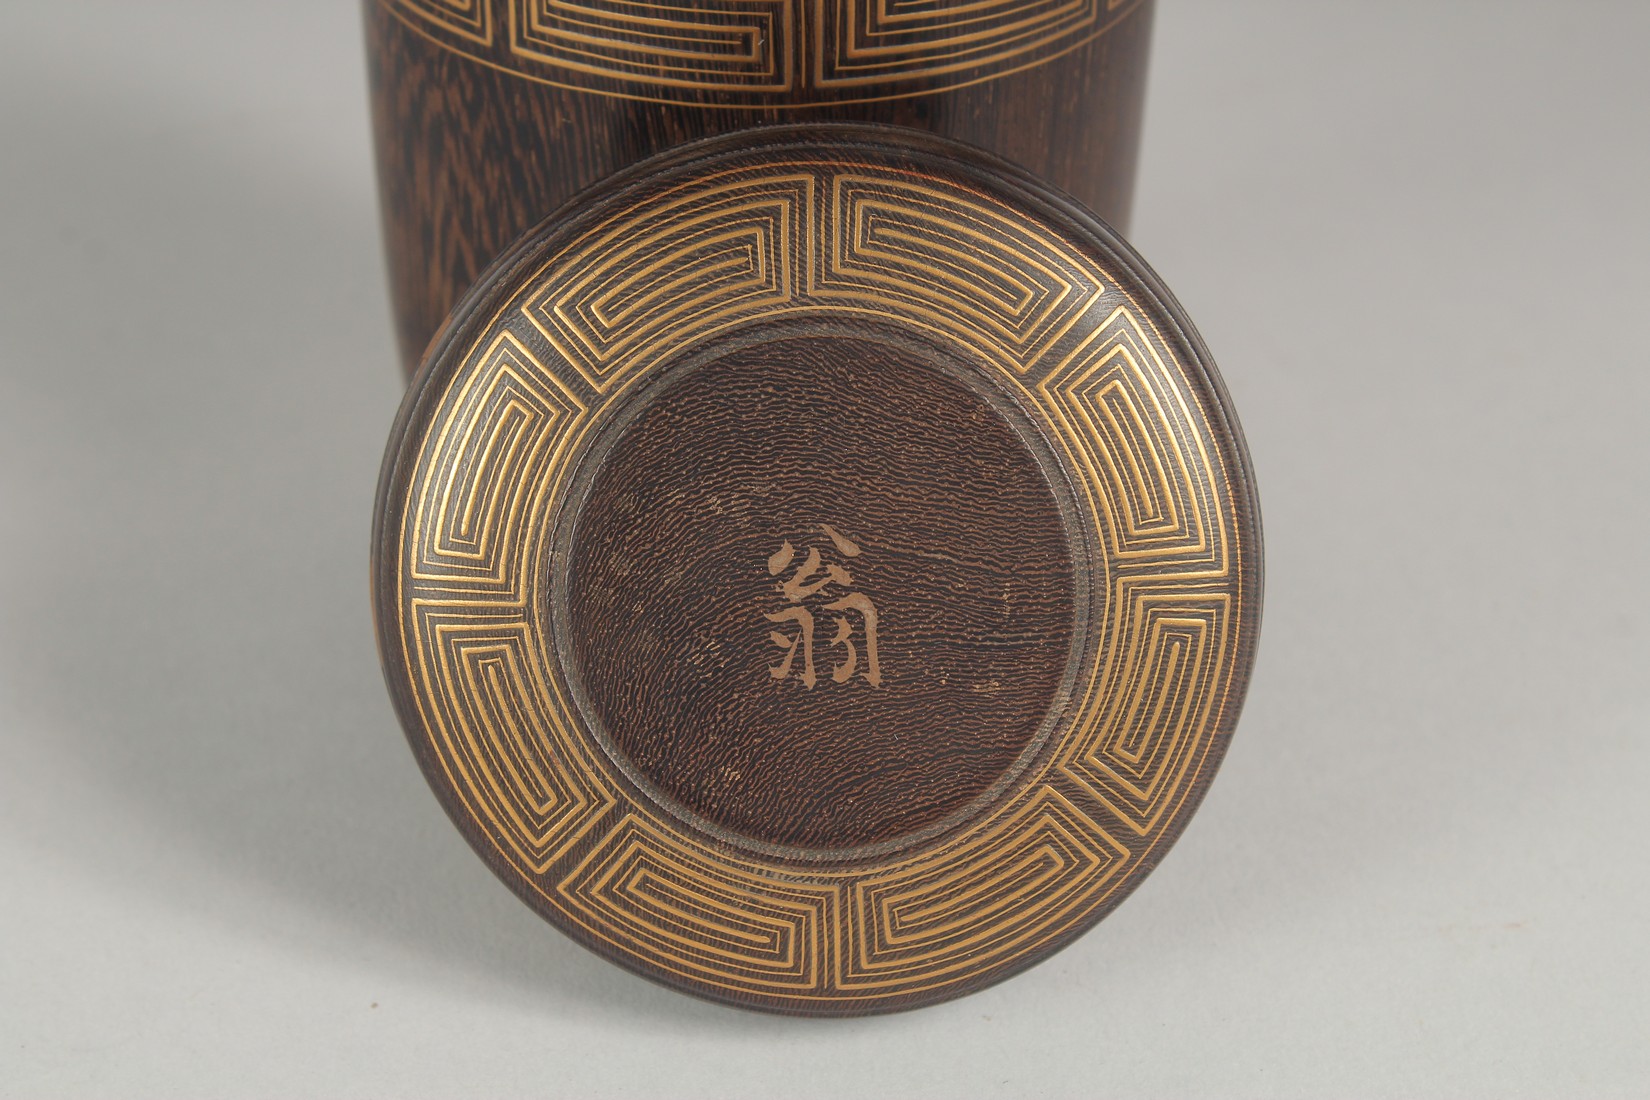 A FINE JAPANESE TURNED WOOD NATSUME / TEA CADDY, with a band of gilded key decoration to the lid and - Image 6 of 9